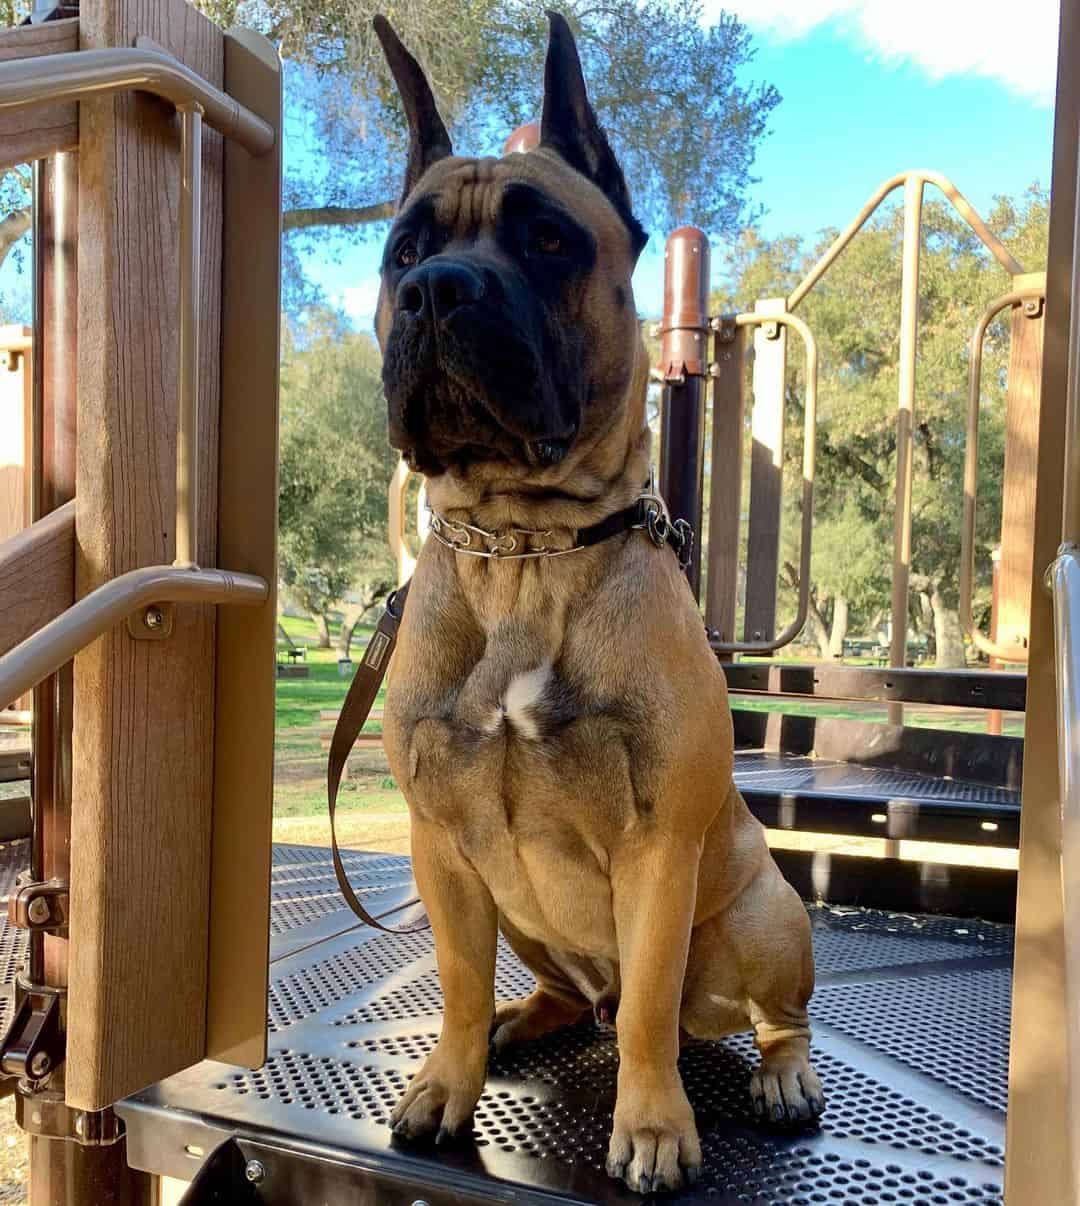 French Bull Dane sits and looks at the camera